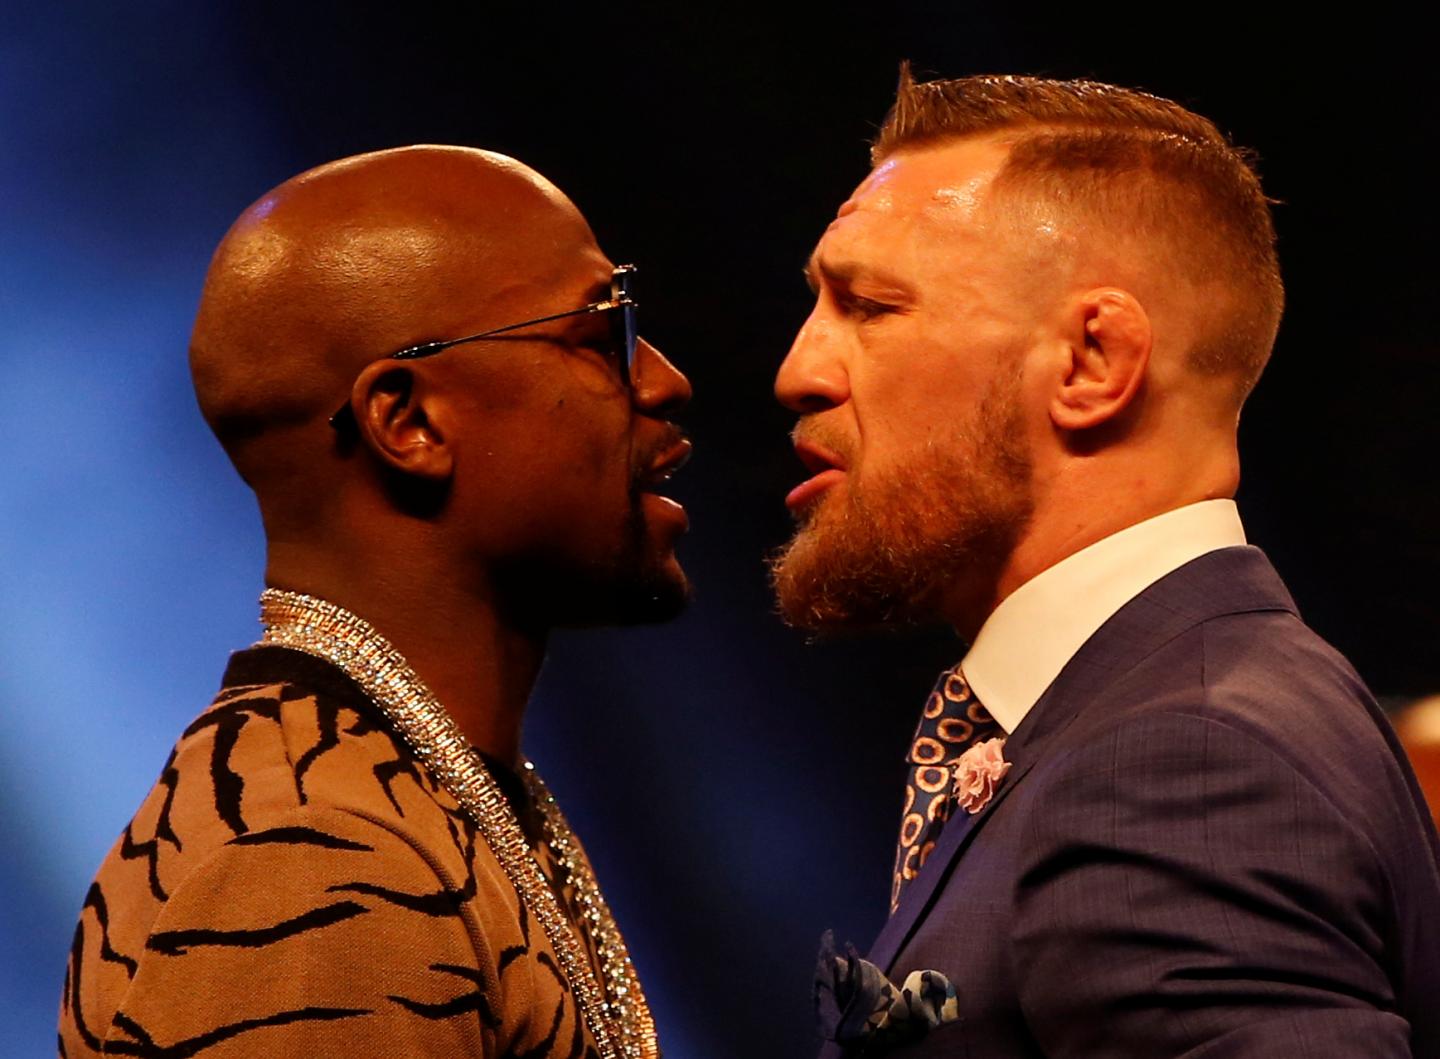 Armour: Why I Won’t be Watching Mayweather – McGregor Fight